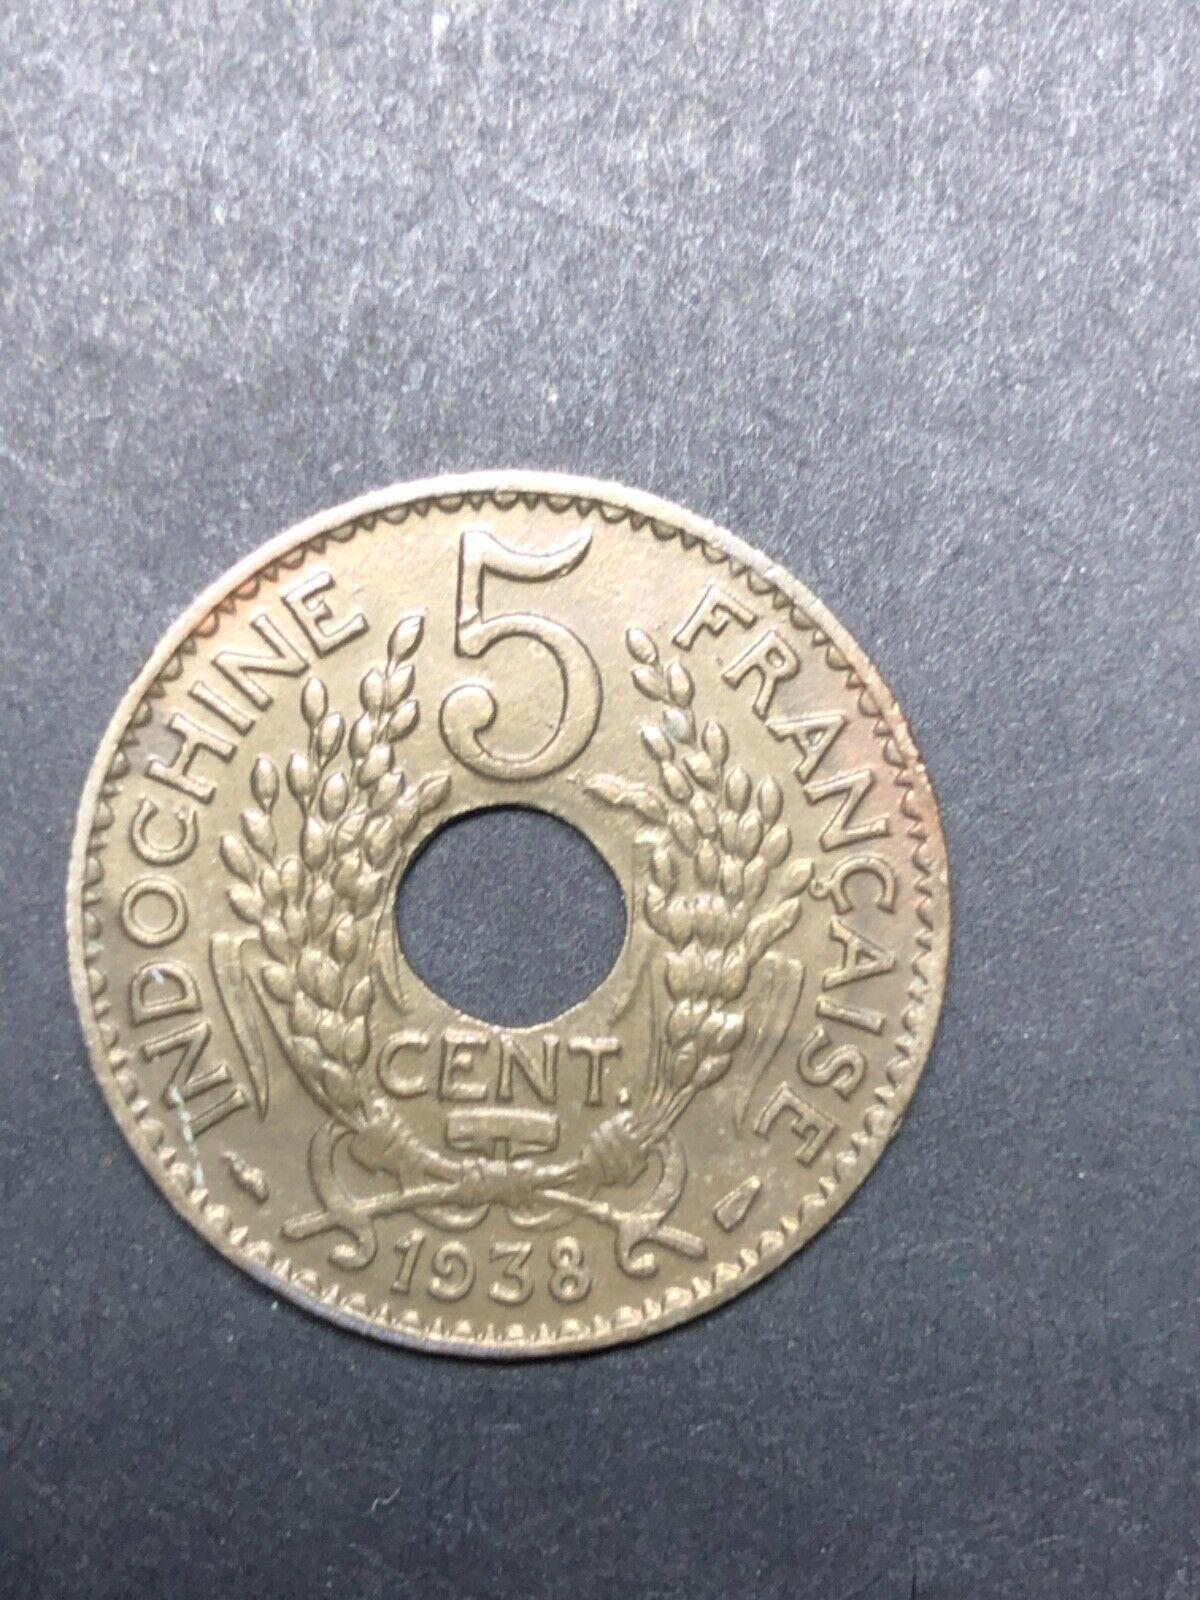 1938 Indo-china 5 Cents - Absolutely Gorgeous Coin A28